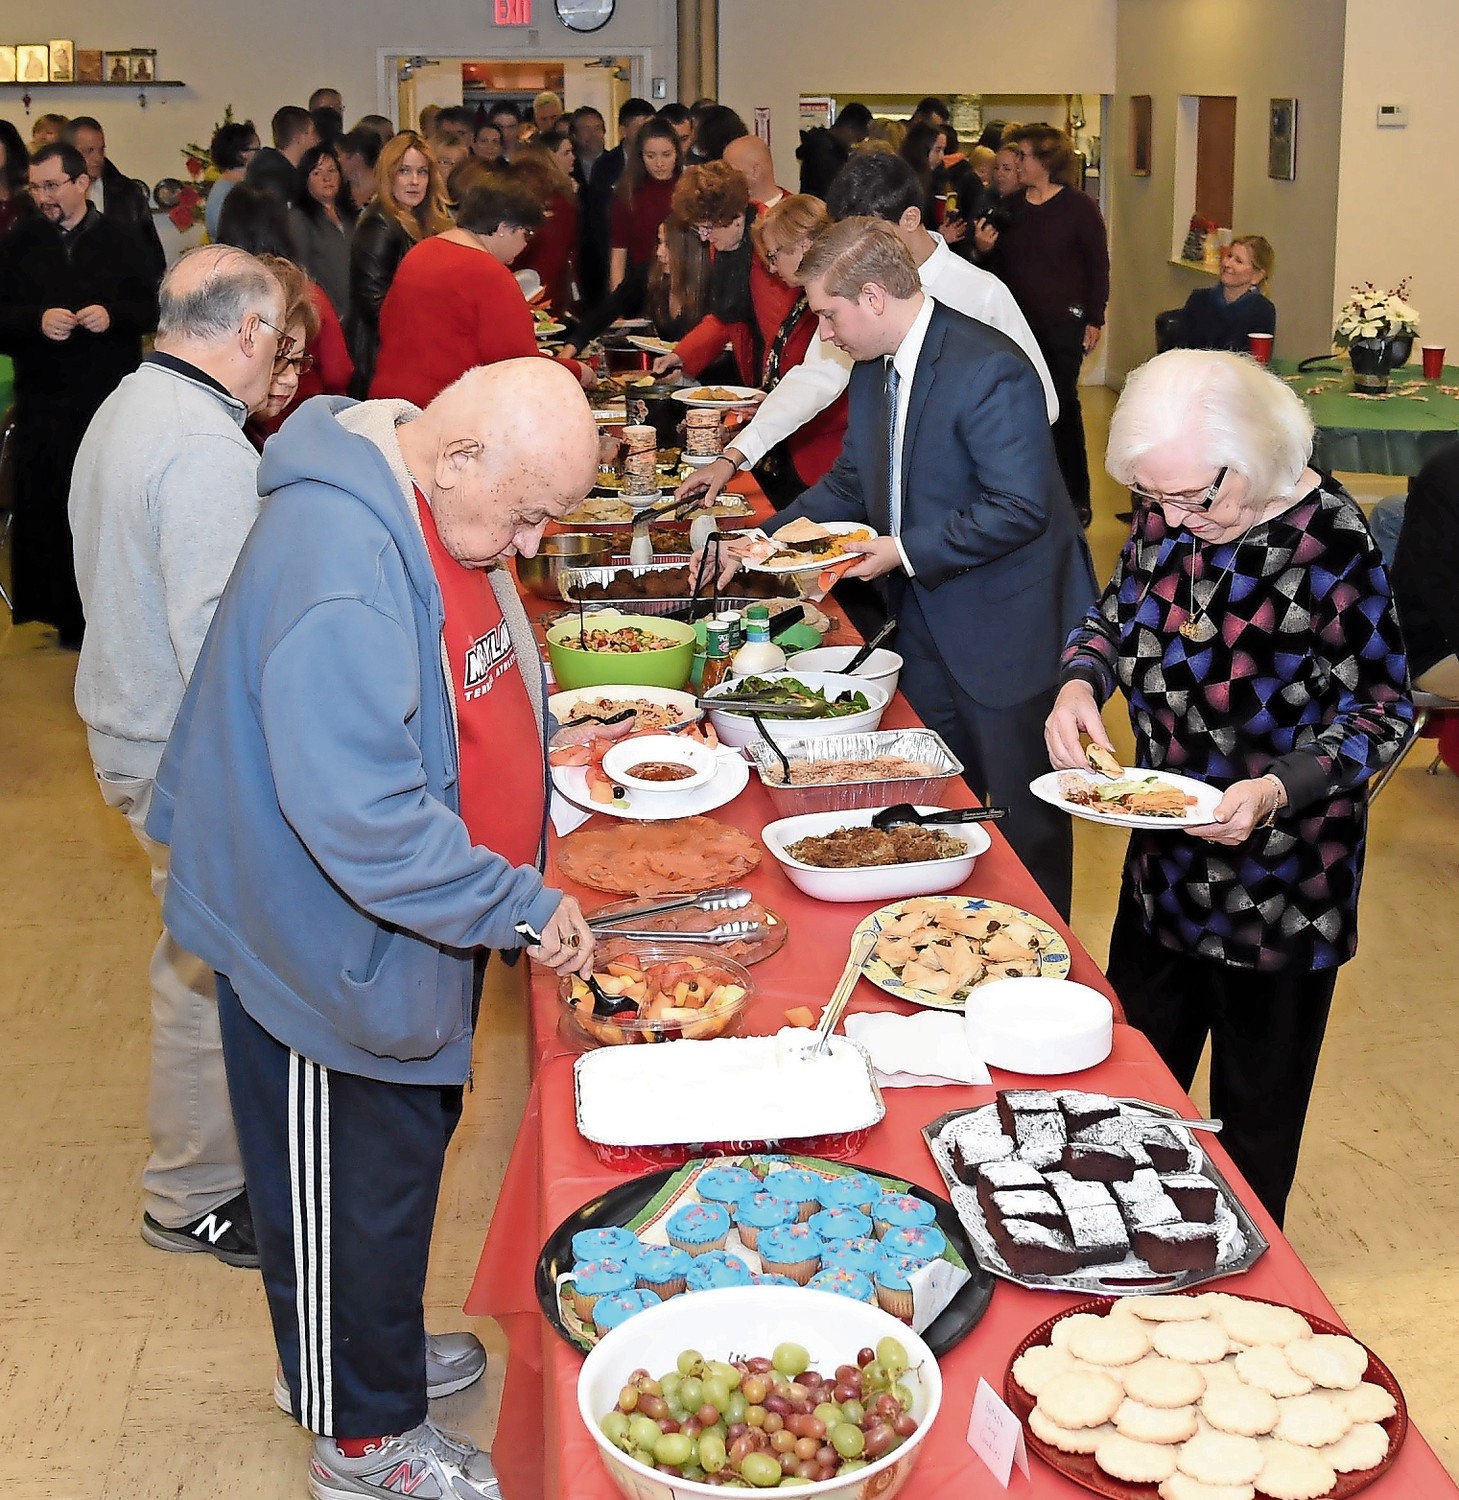 After the concert, attendees enjoyed dinner and dessert prepared by church staff and members.